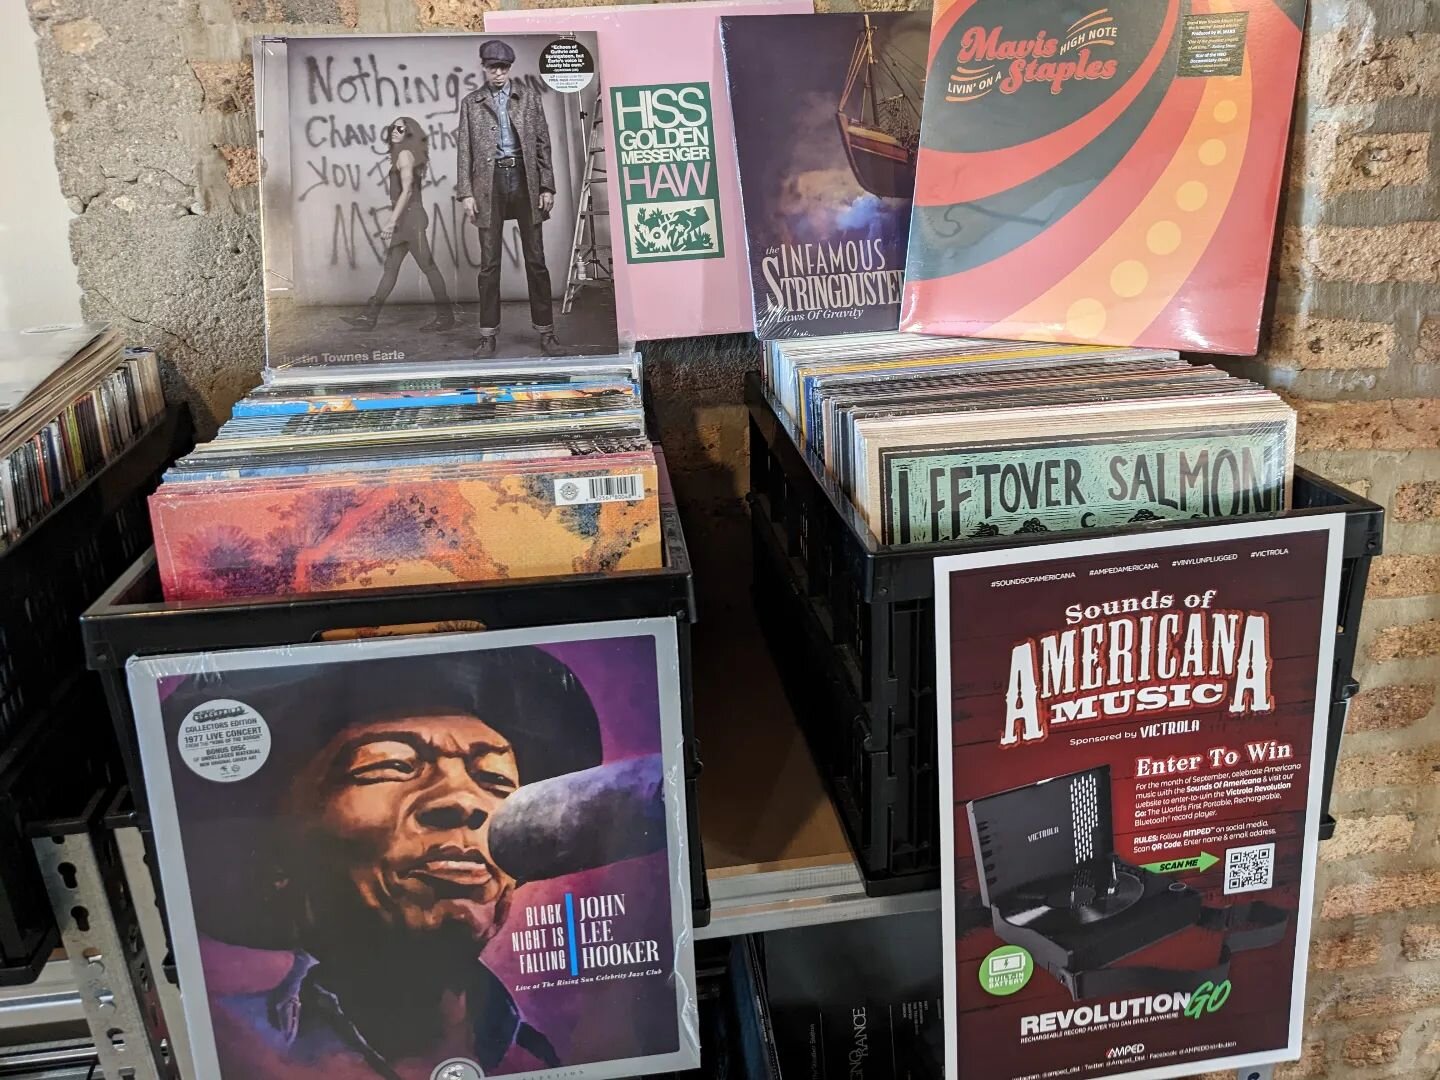 Stop by our retail pop-ups to shop an excellent selection of Americana titles from @amped_dist! Titles from artists like Mavis Staples, John Lee Hooker, Hiss Golden Messenger, Leftover Salmon and MORE will be for sale - don't miss out!  #AMPEDAmerica